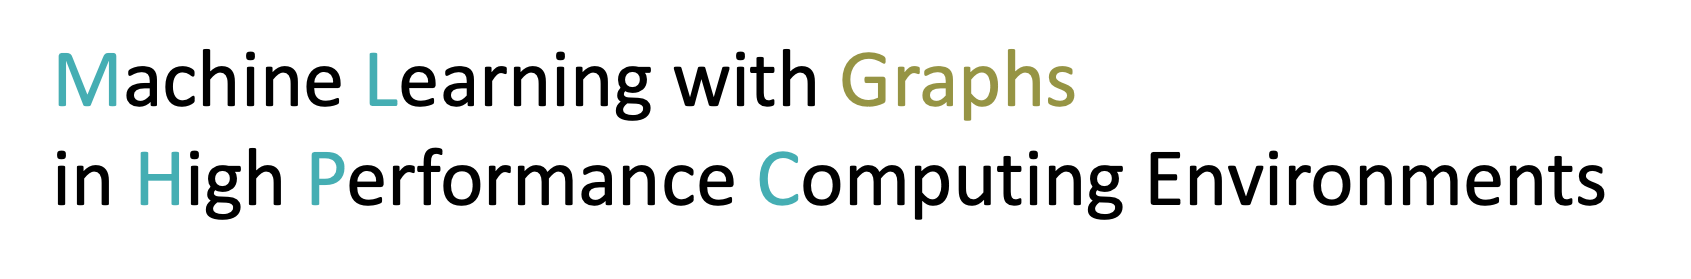 Workshop on Machine Learning with Graphs in HPC Environments